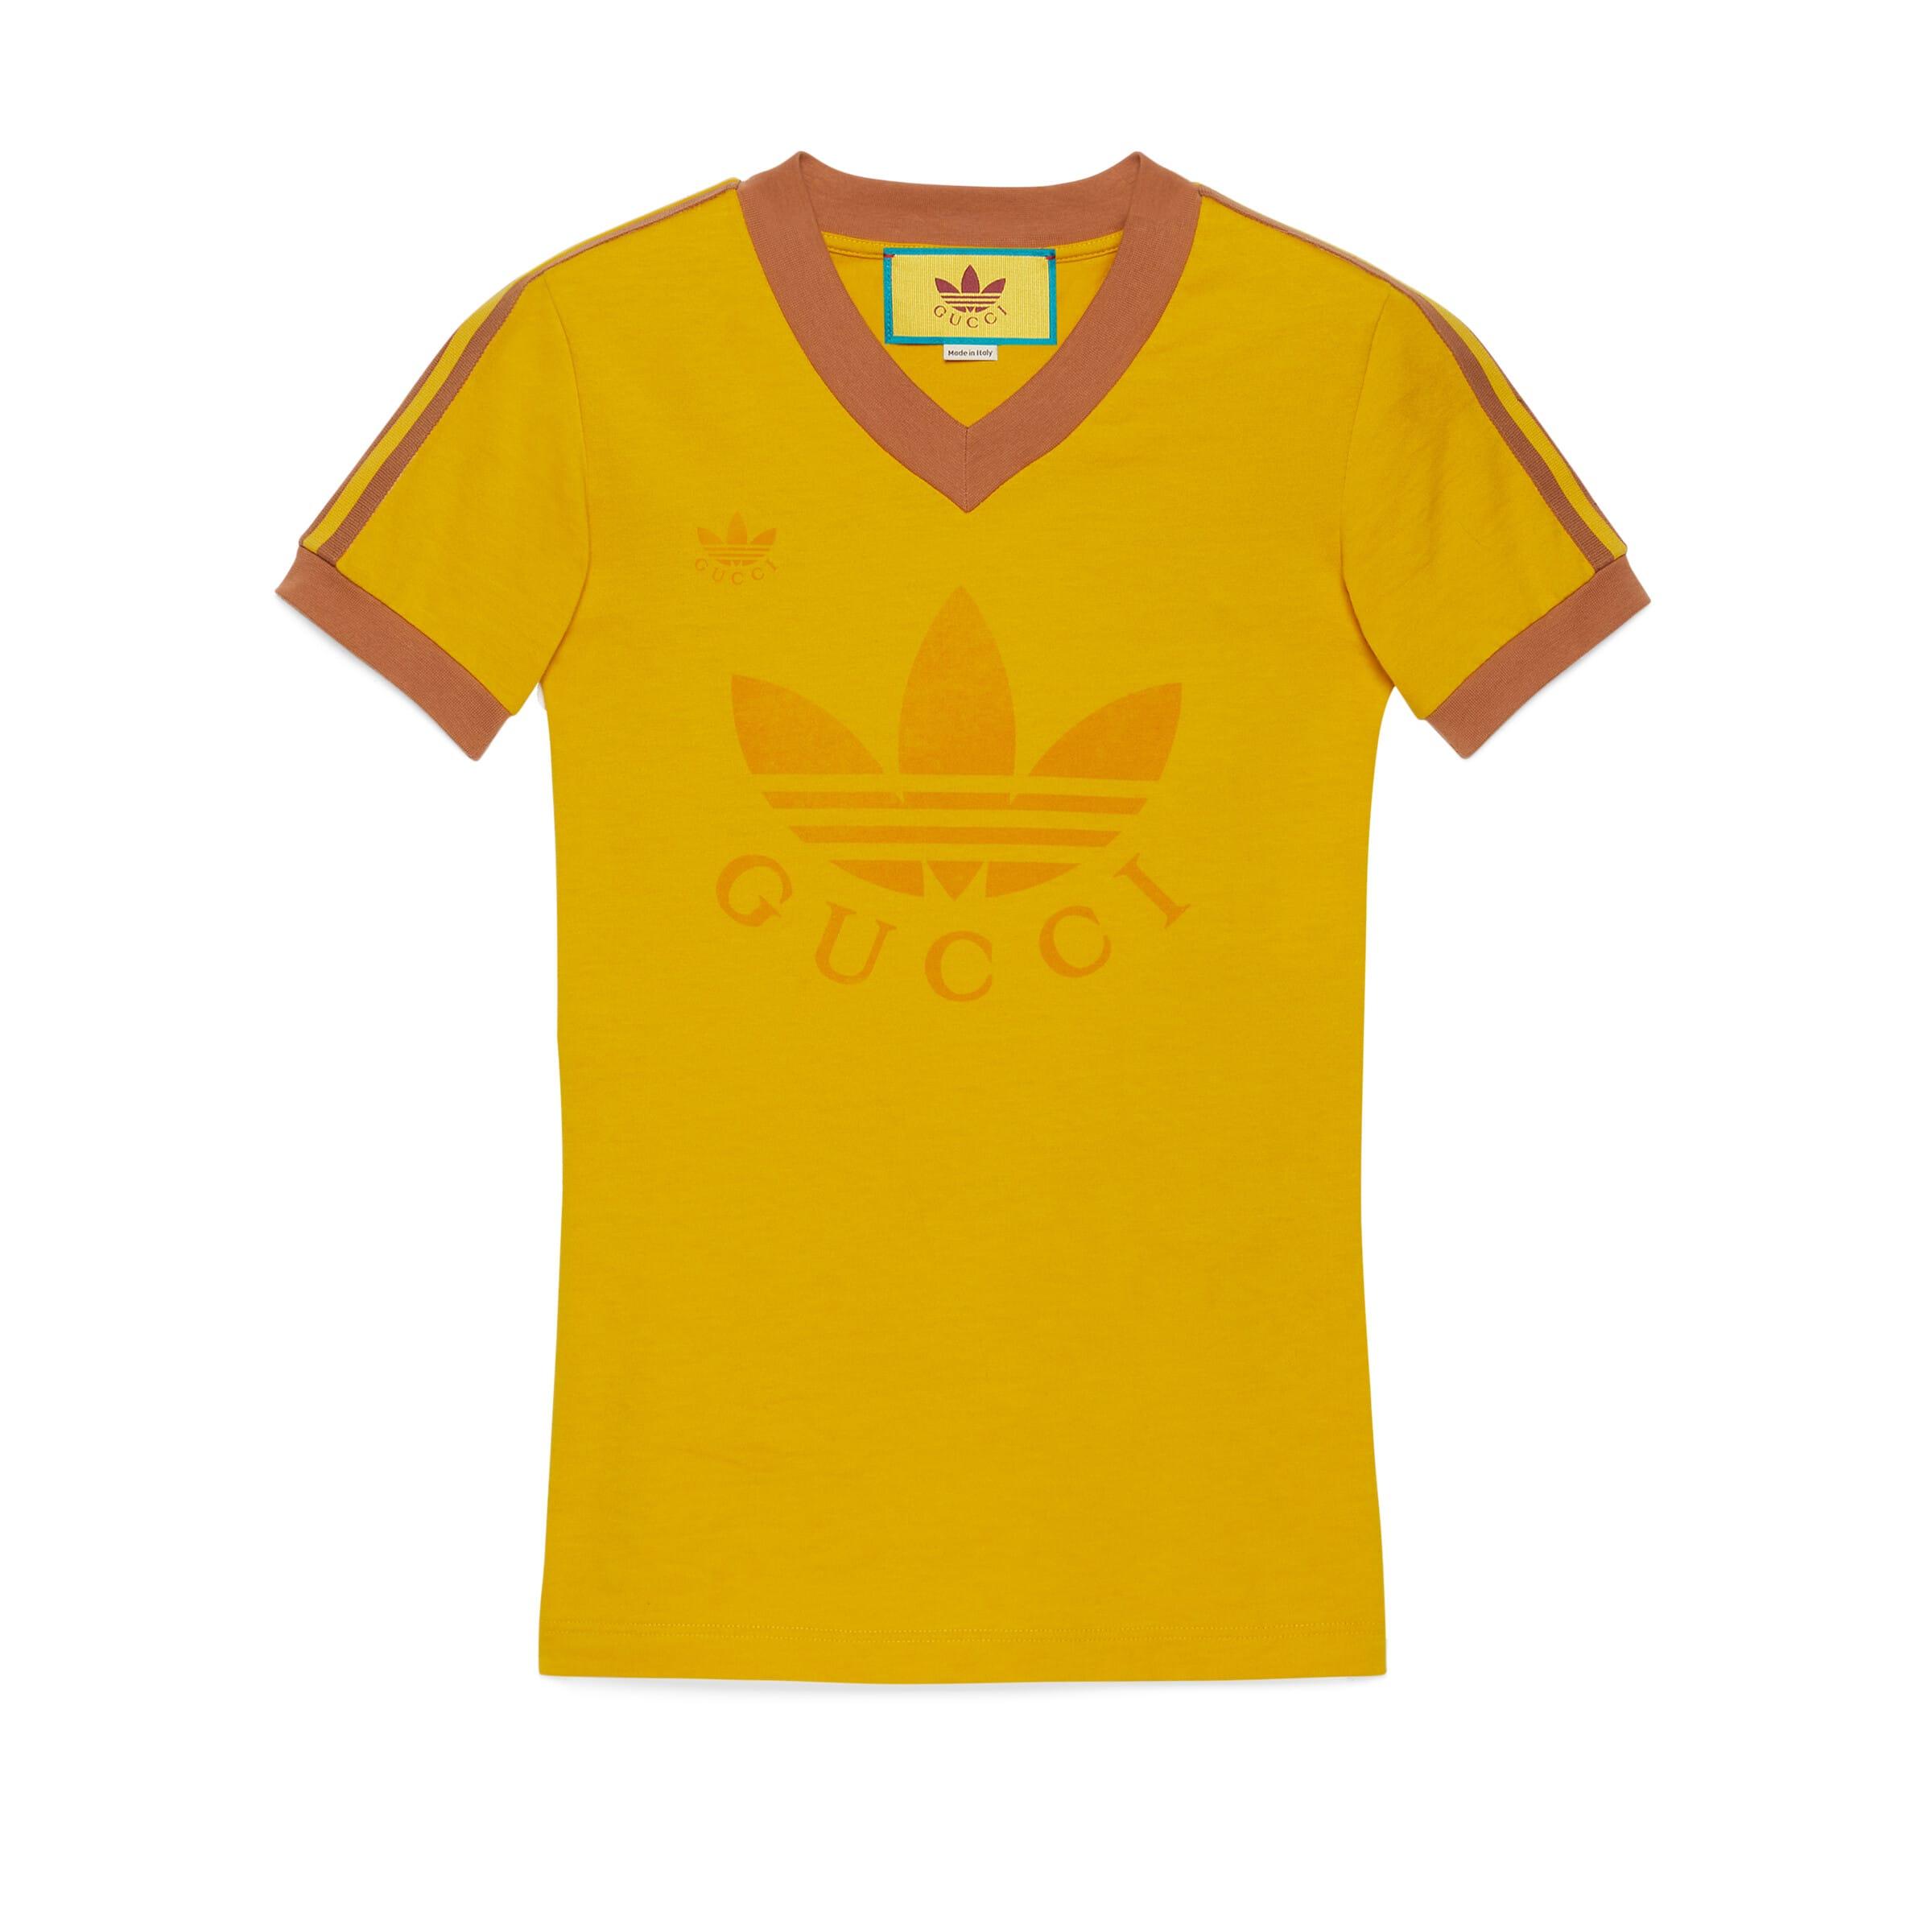 Gucci Adidas X T-shirt in Yellow |